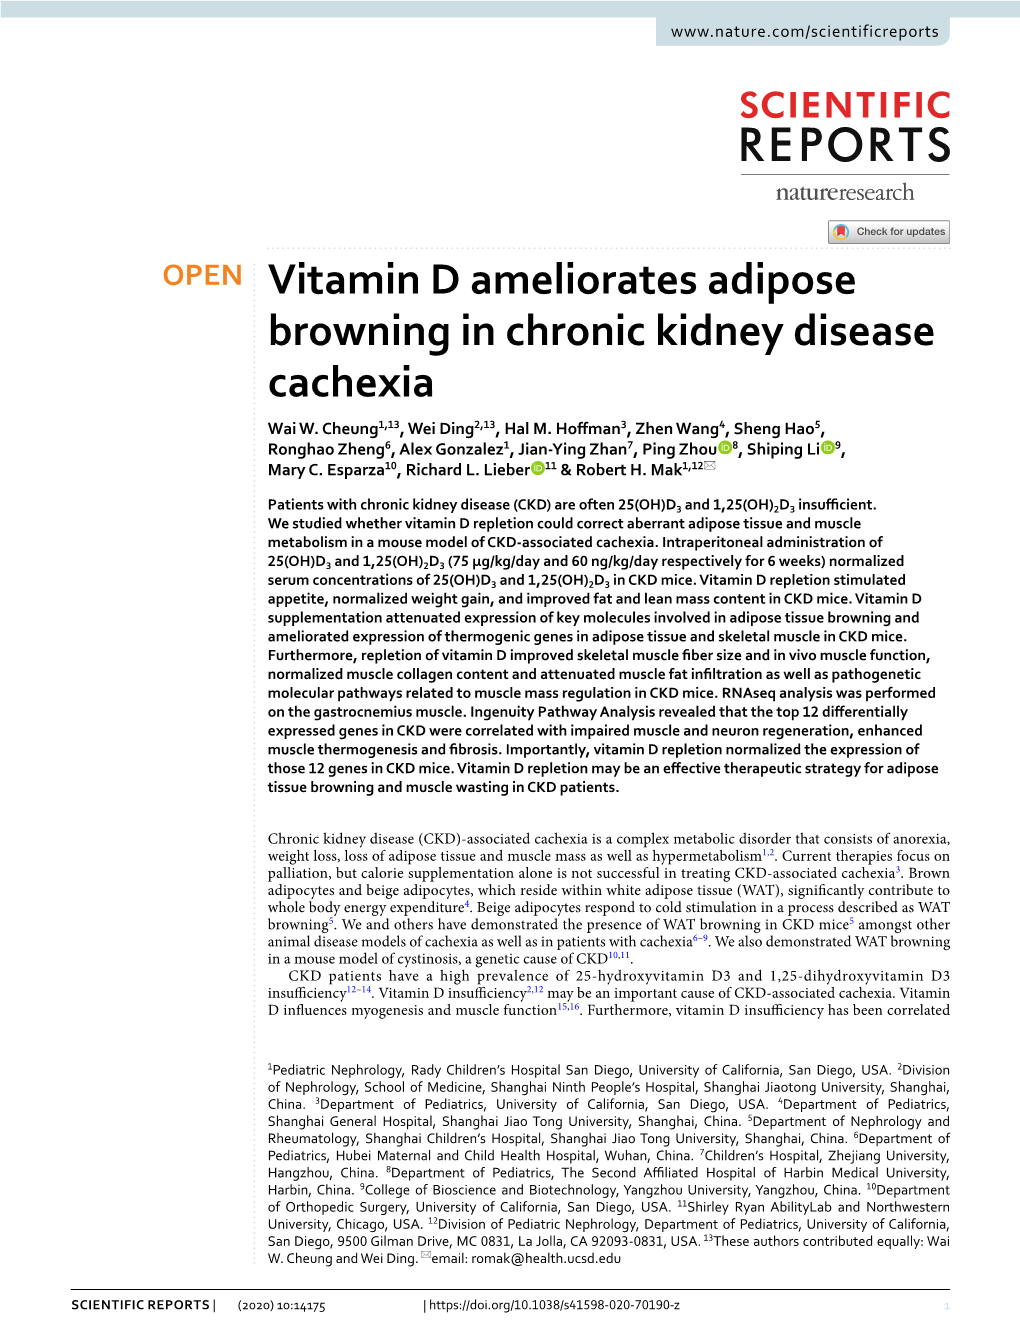 Vitamin D Ameliorates Adipose Browning in Chronic Kidney Disease Cachexia Wai W